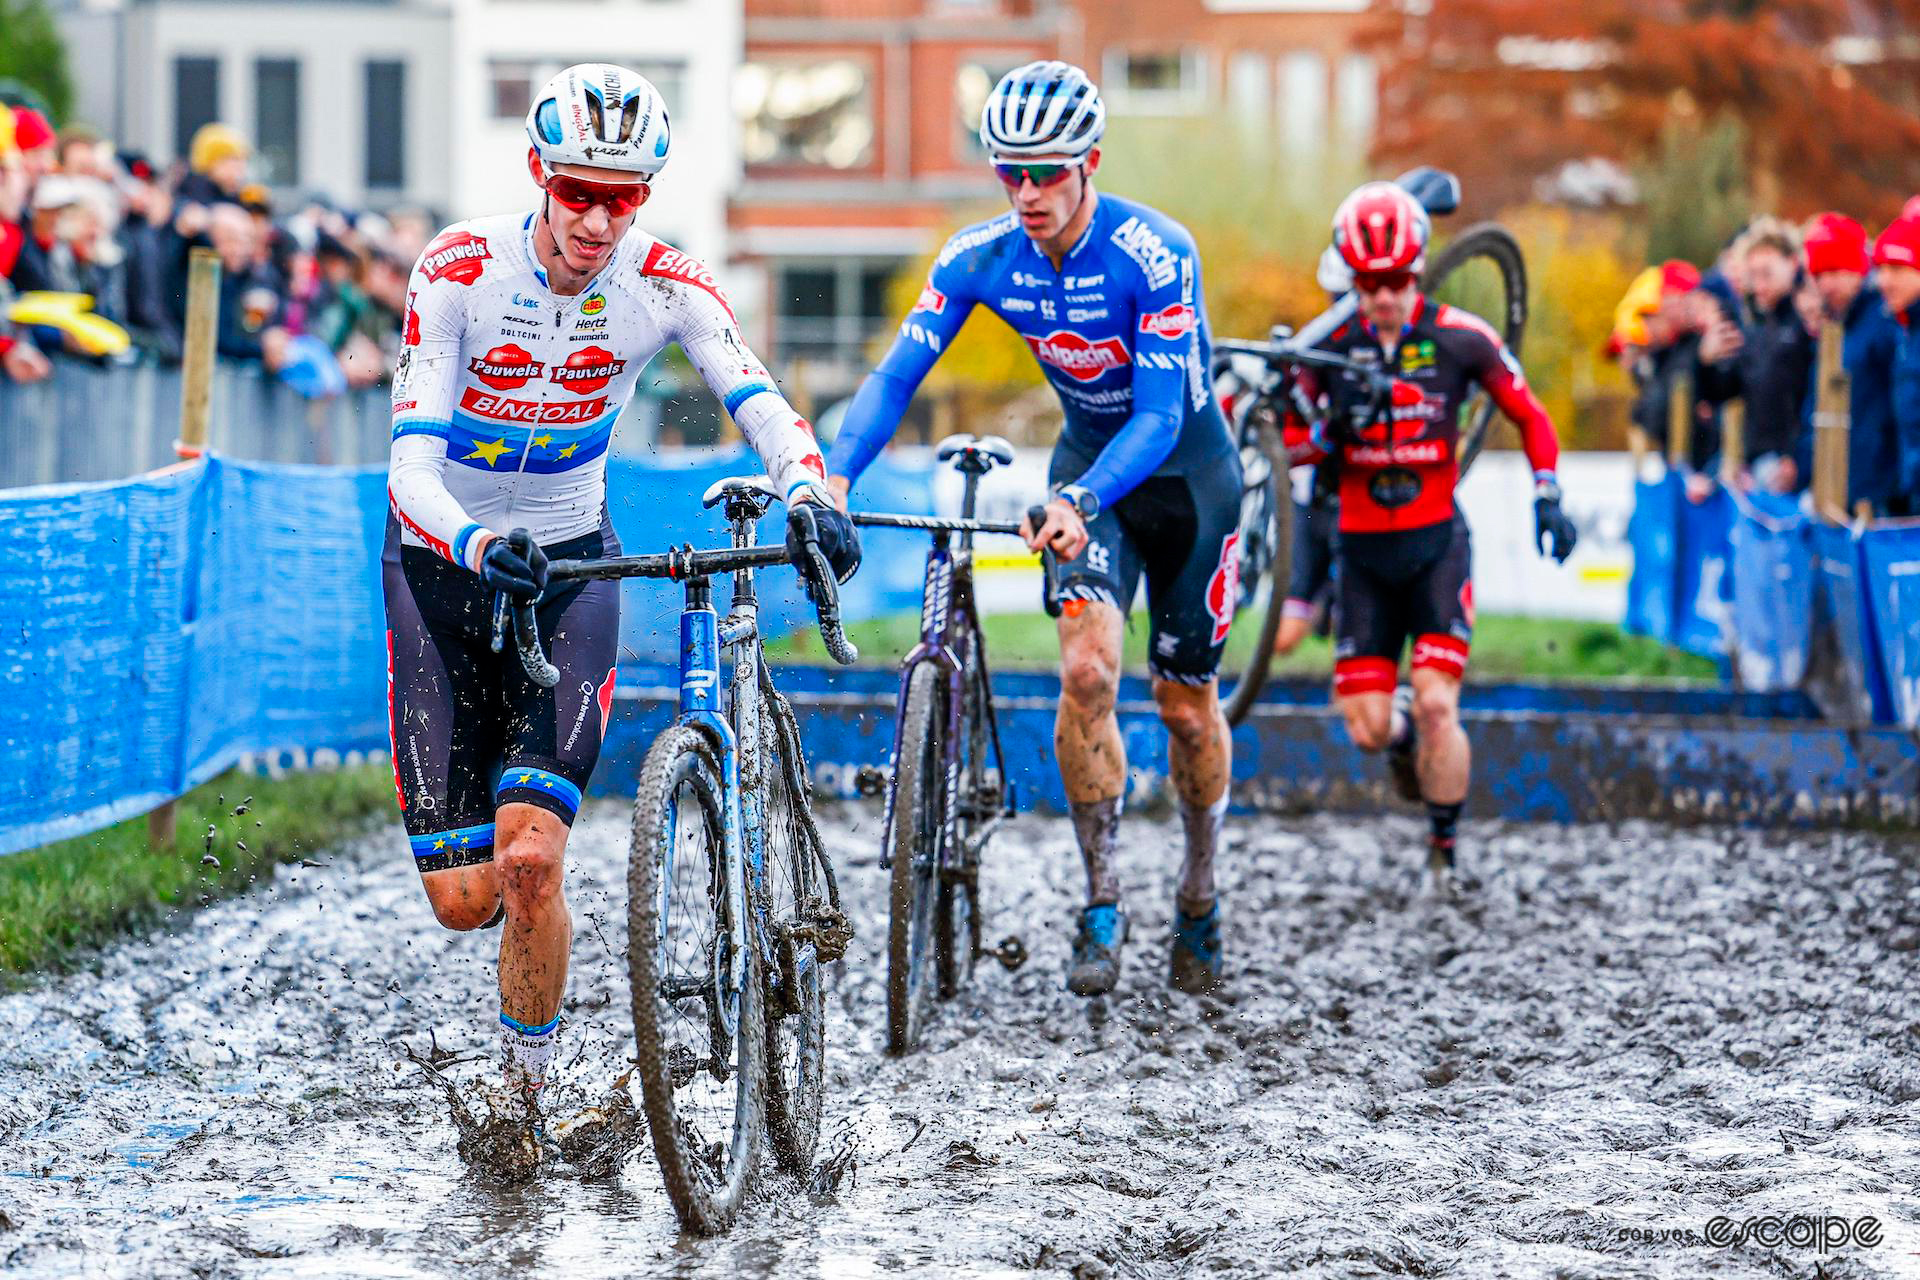 Michael Vanthourenhout leads the way single file through thick, wet mud, on foot with his bike alongside him during X20 Trofee Kortrijk.